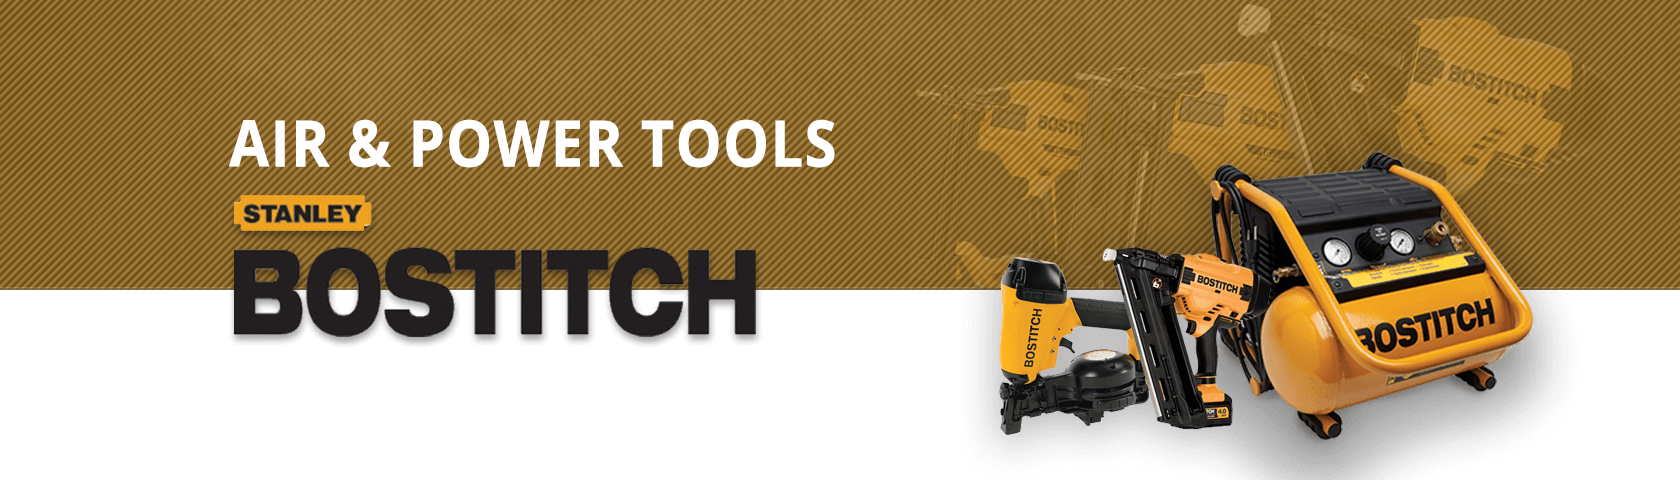 Bostitch Nailers and Compressors